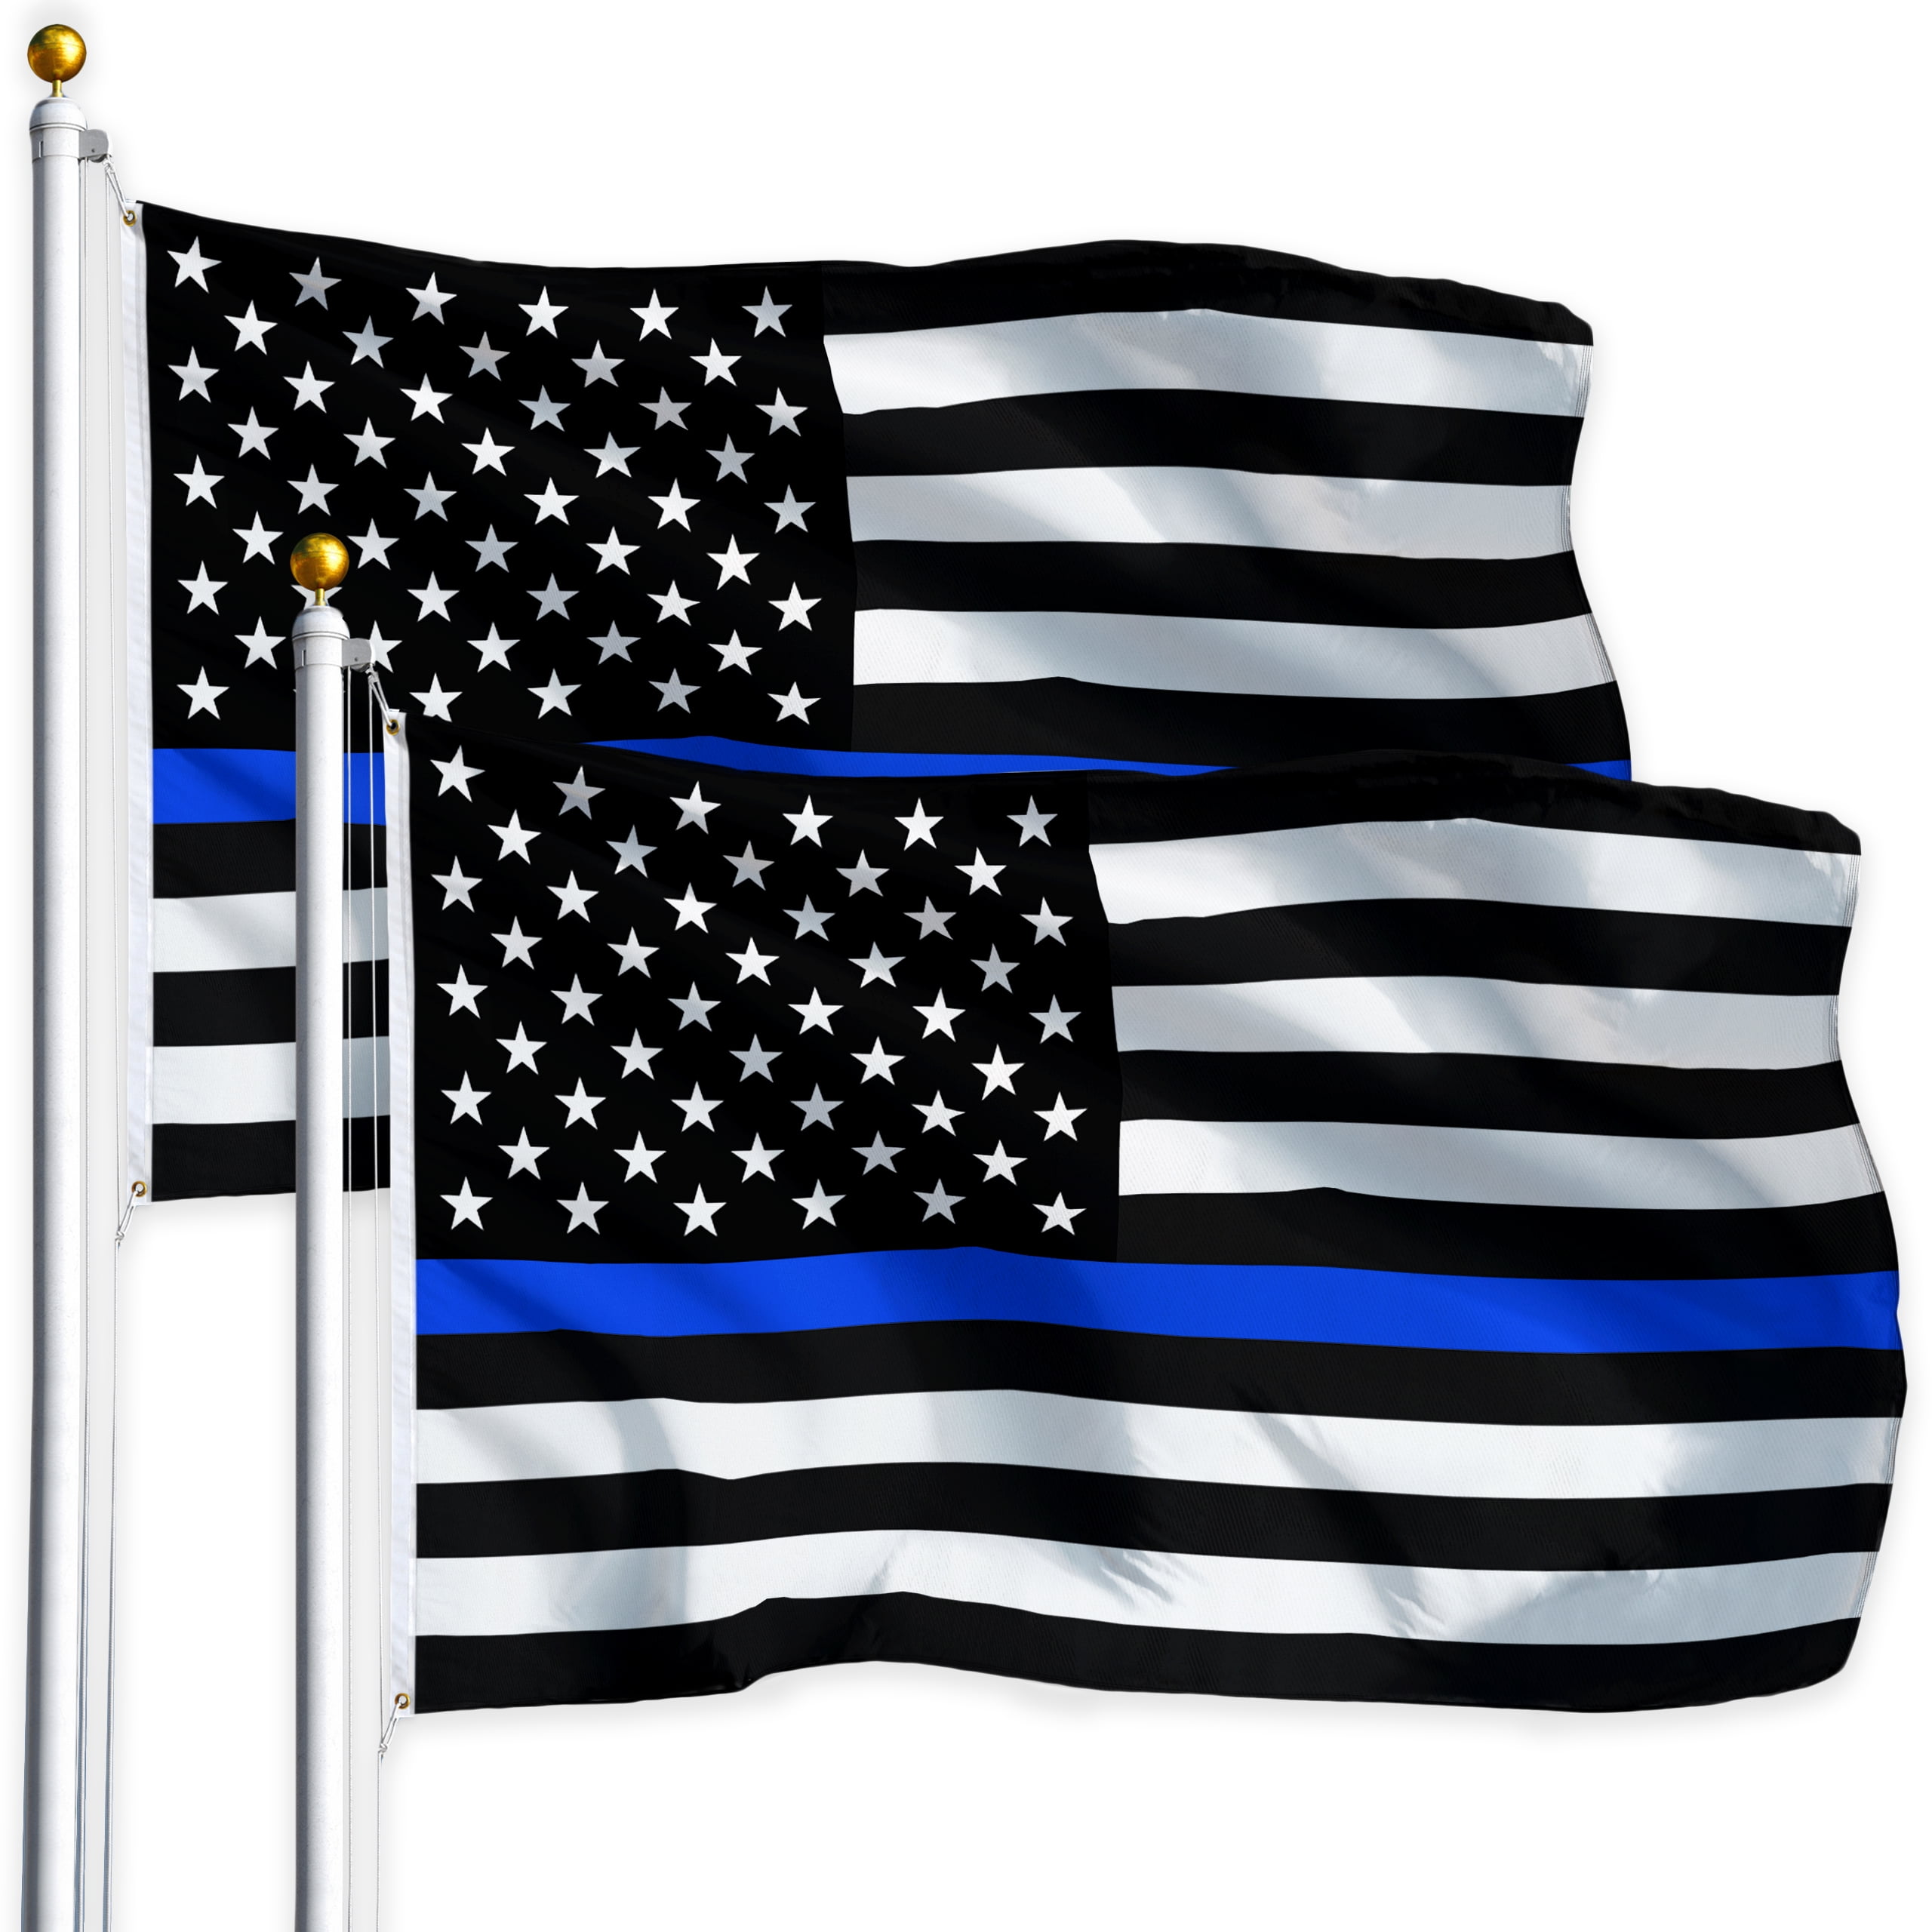 The USA Flags 3*5 Ft Flag Black White And Blue American 150x90cm United States